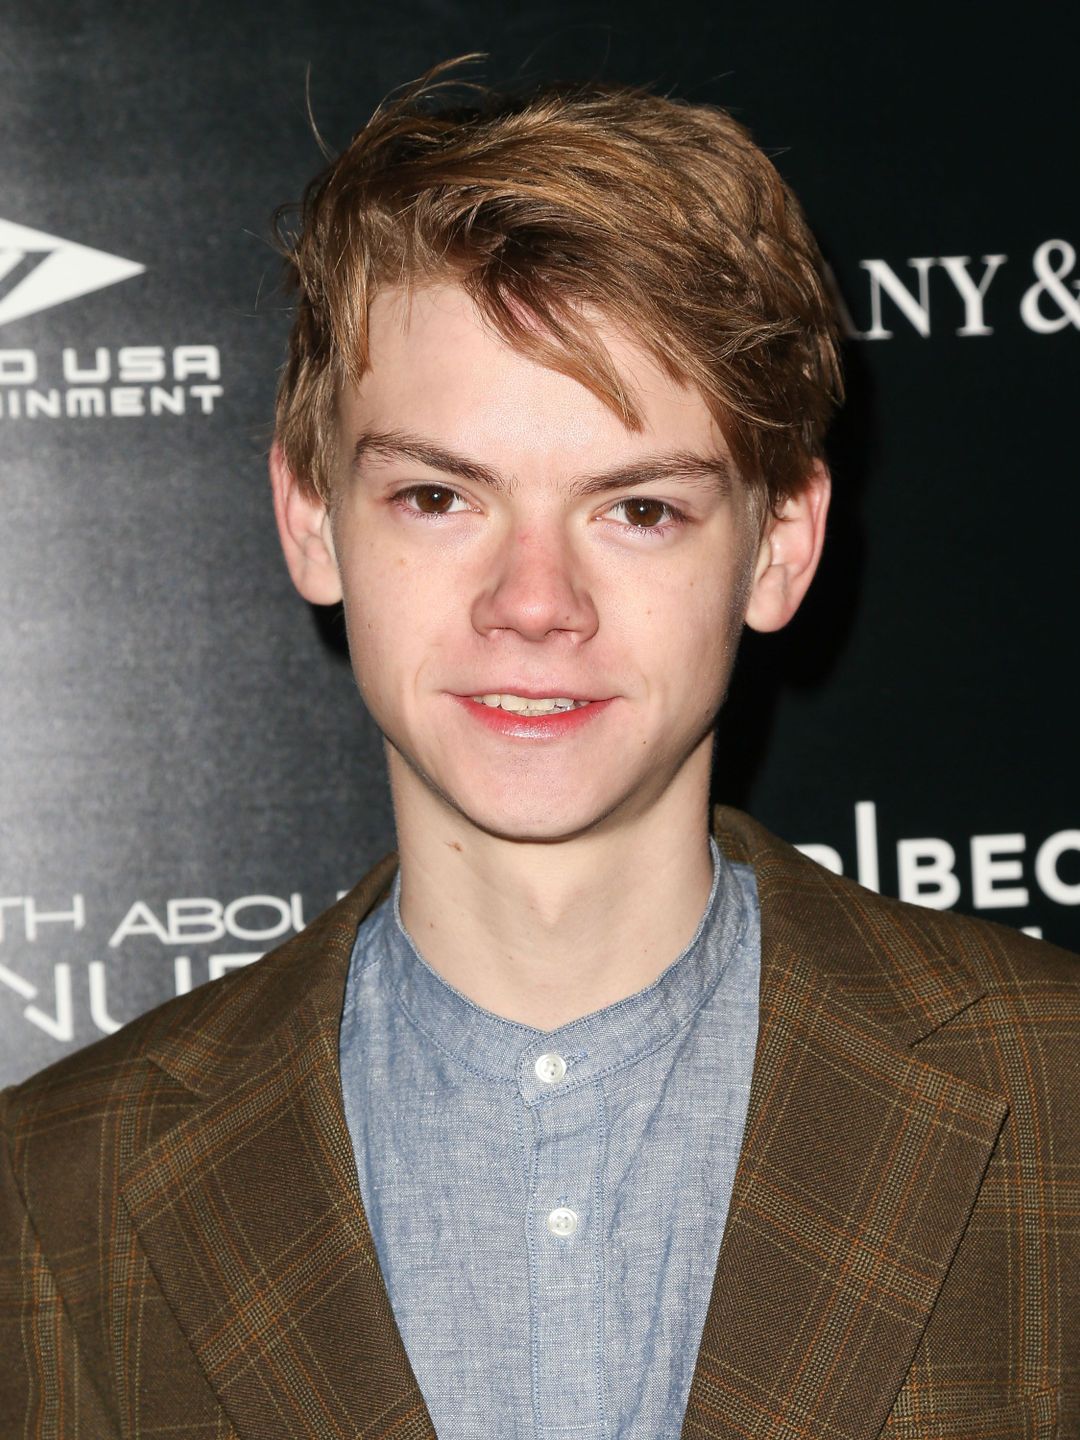 Thomas Sangster in his teens